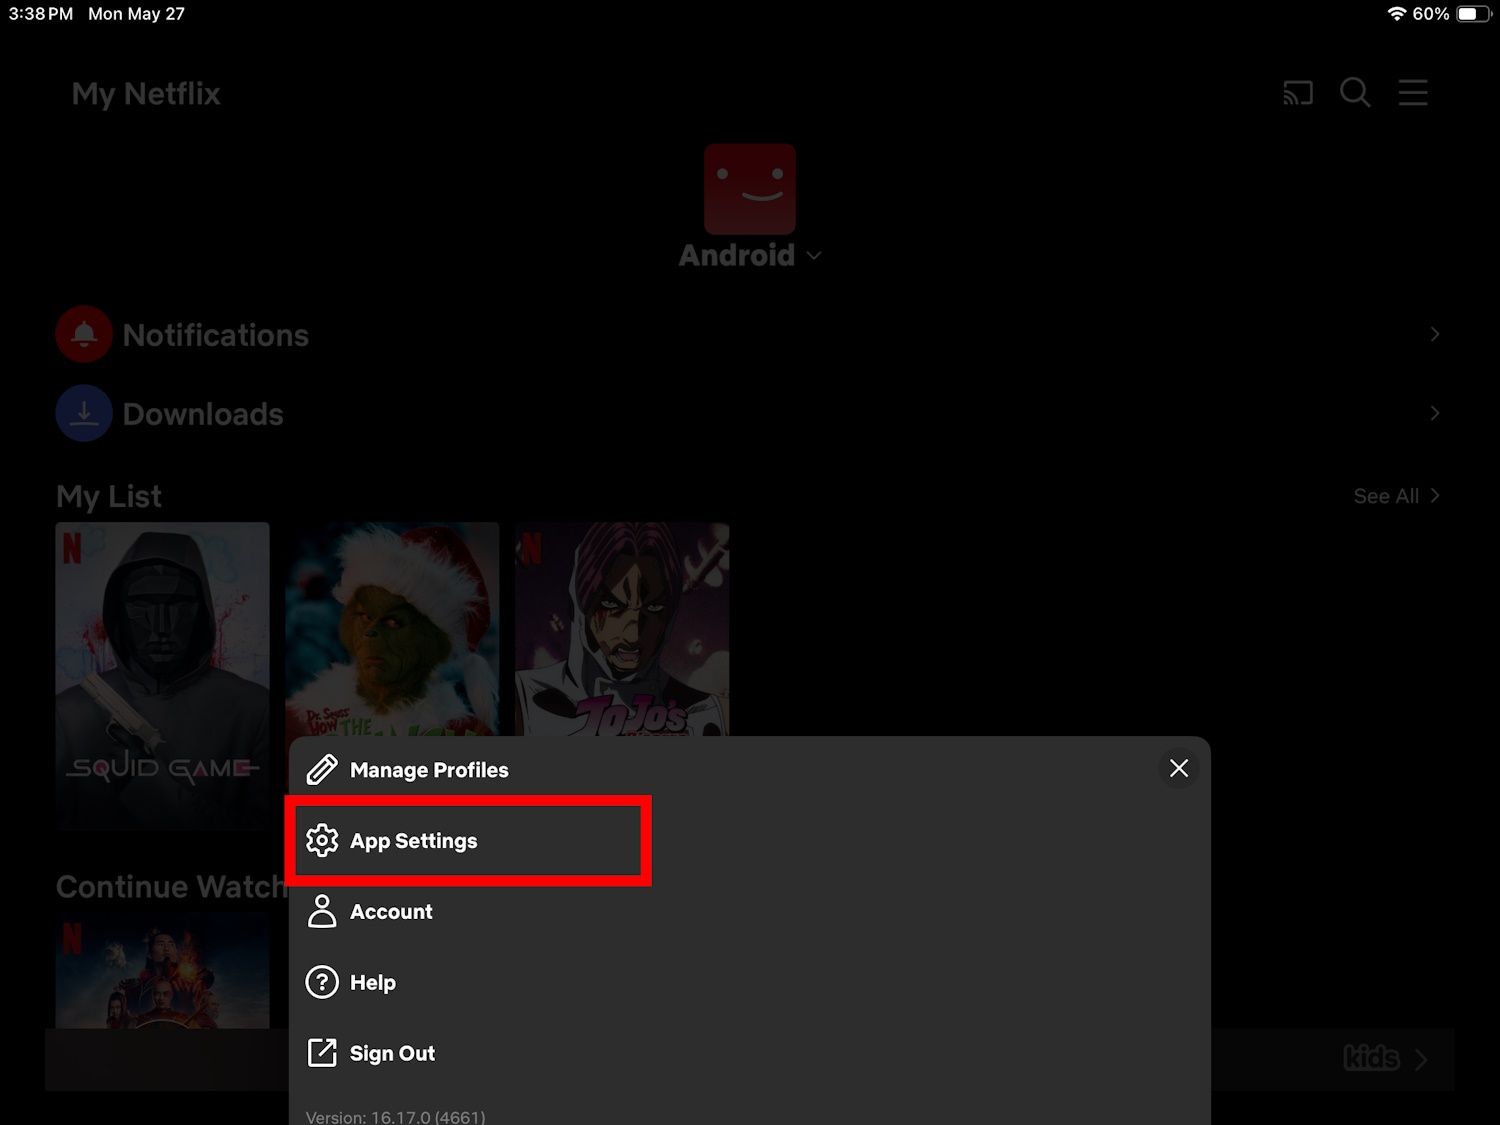 red rectangle outline over app settings in netflix app on an ipad